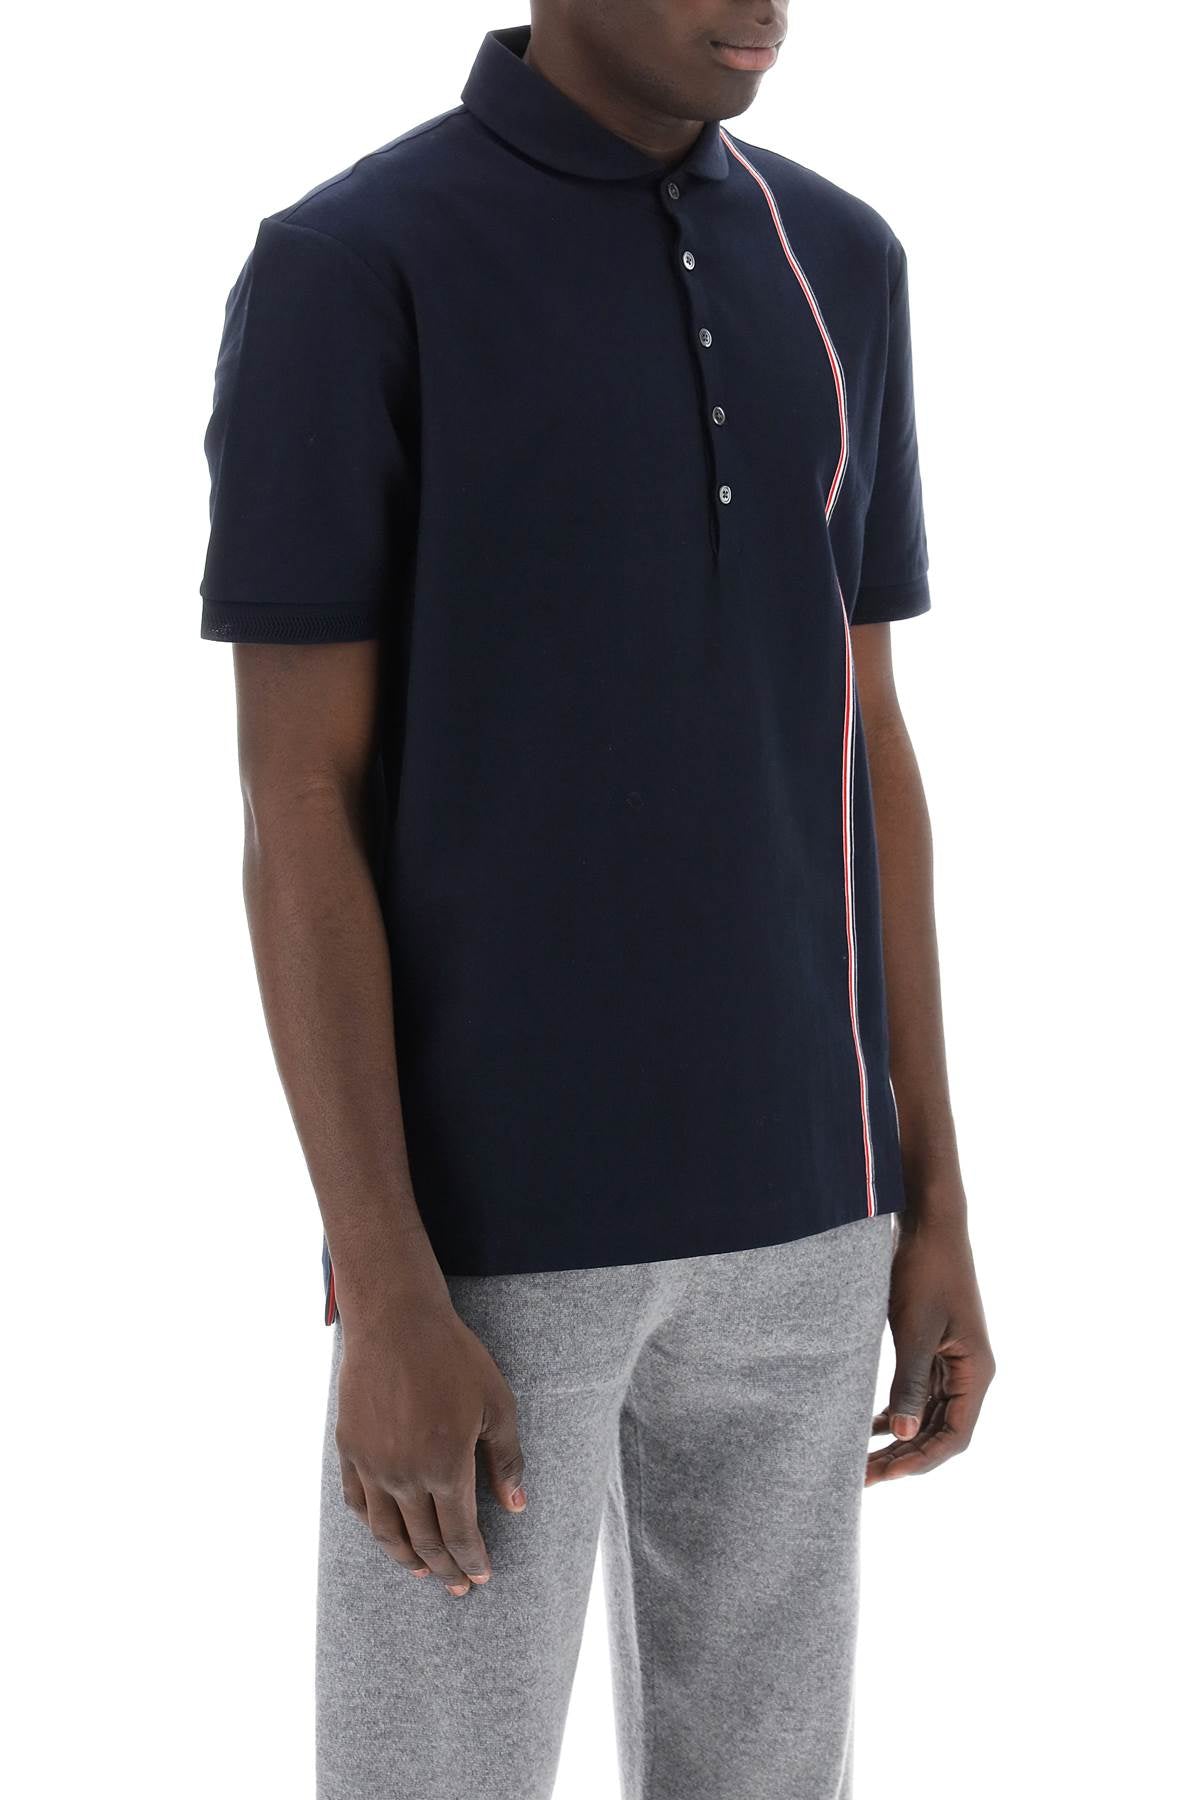 THOM BROWNE Men's Tricolor Intarsia Polo Shirt for SS24